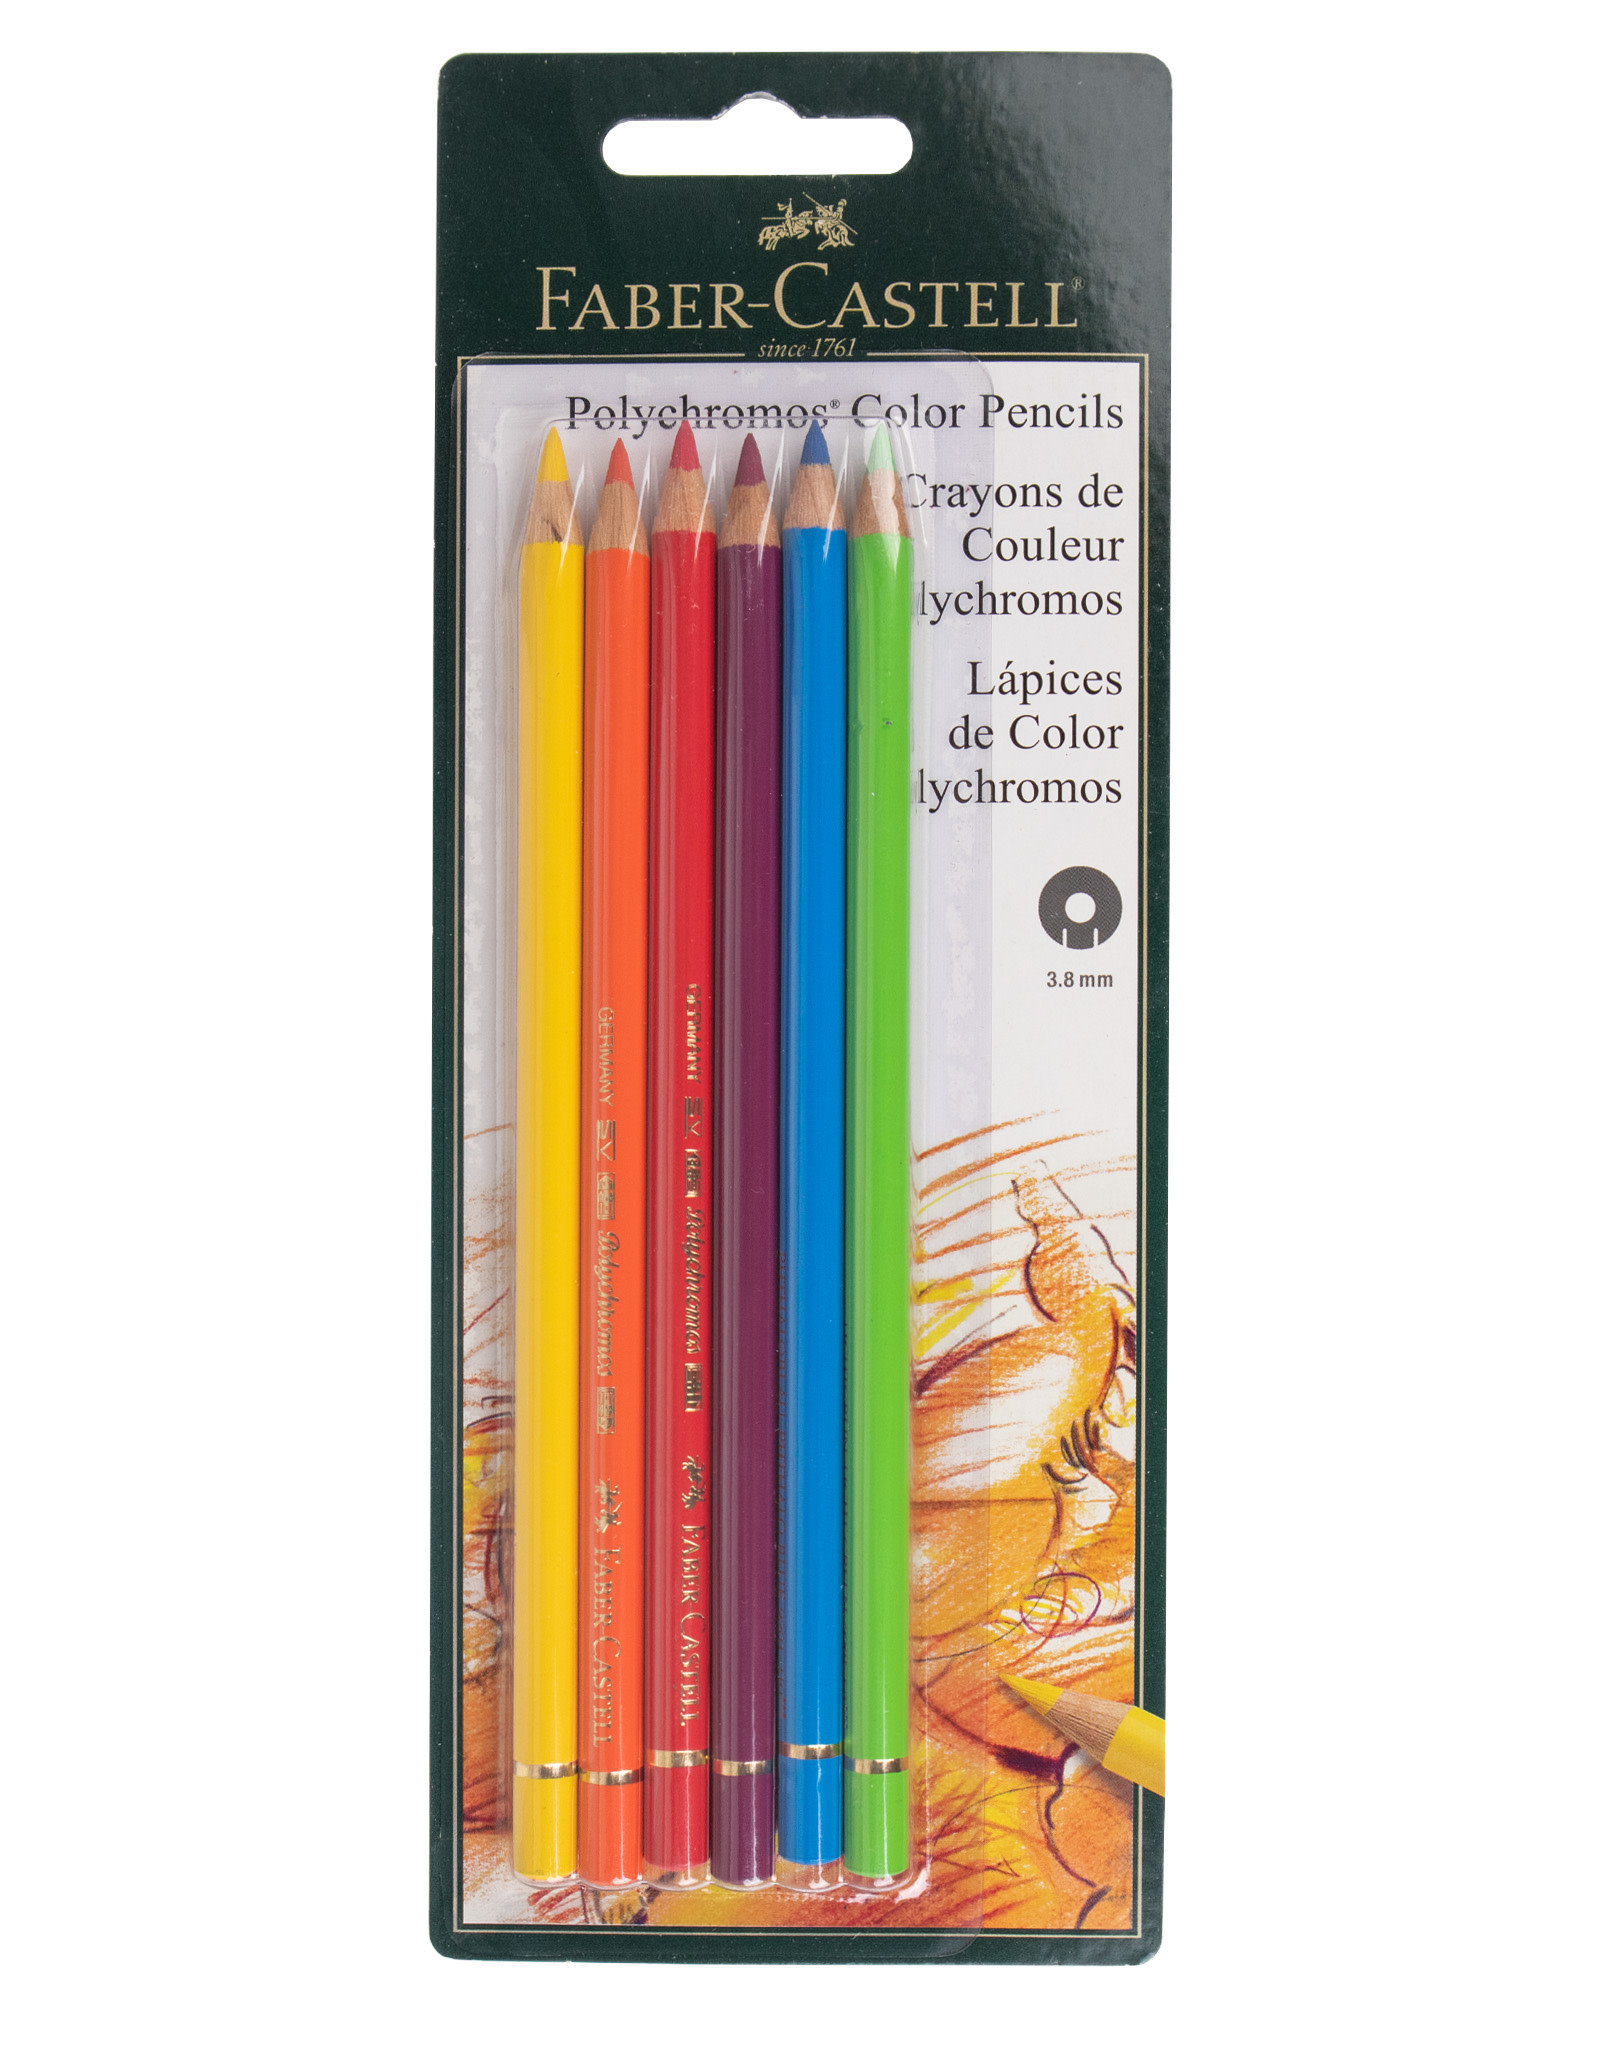 FABER-CASTELL Faber-Castell Polychromos, Prussian Blue # 246 - The Art  Store/Commercial Art Supply